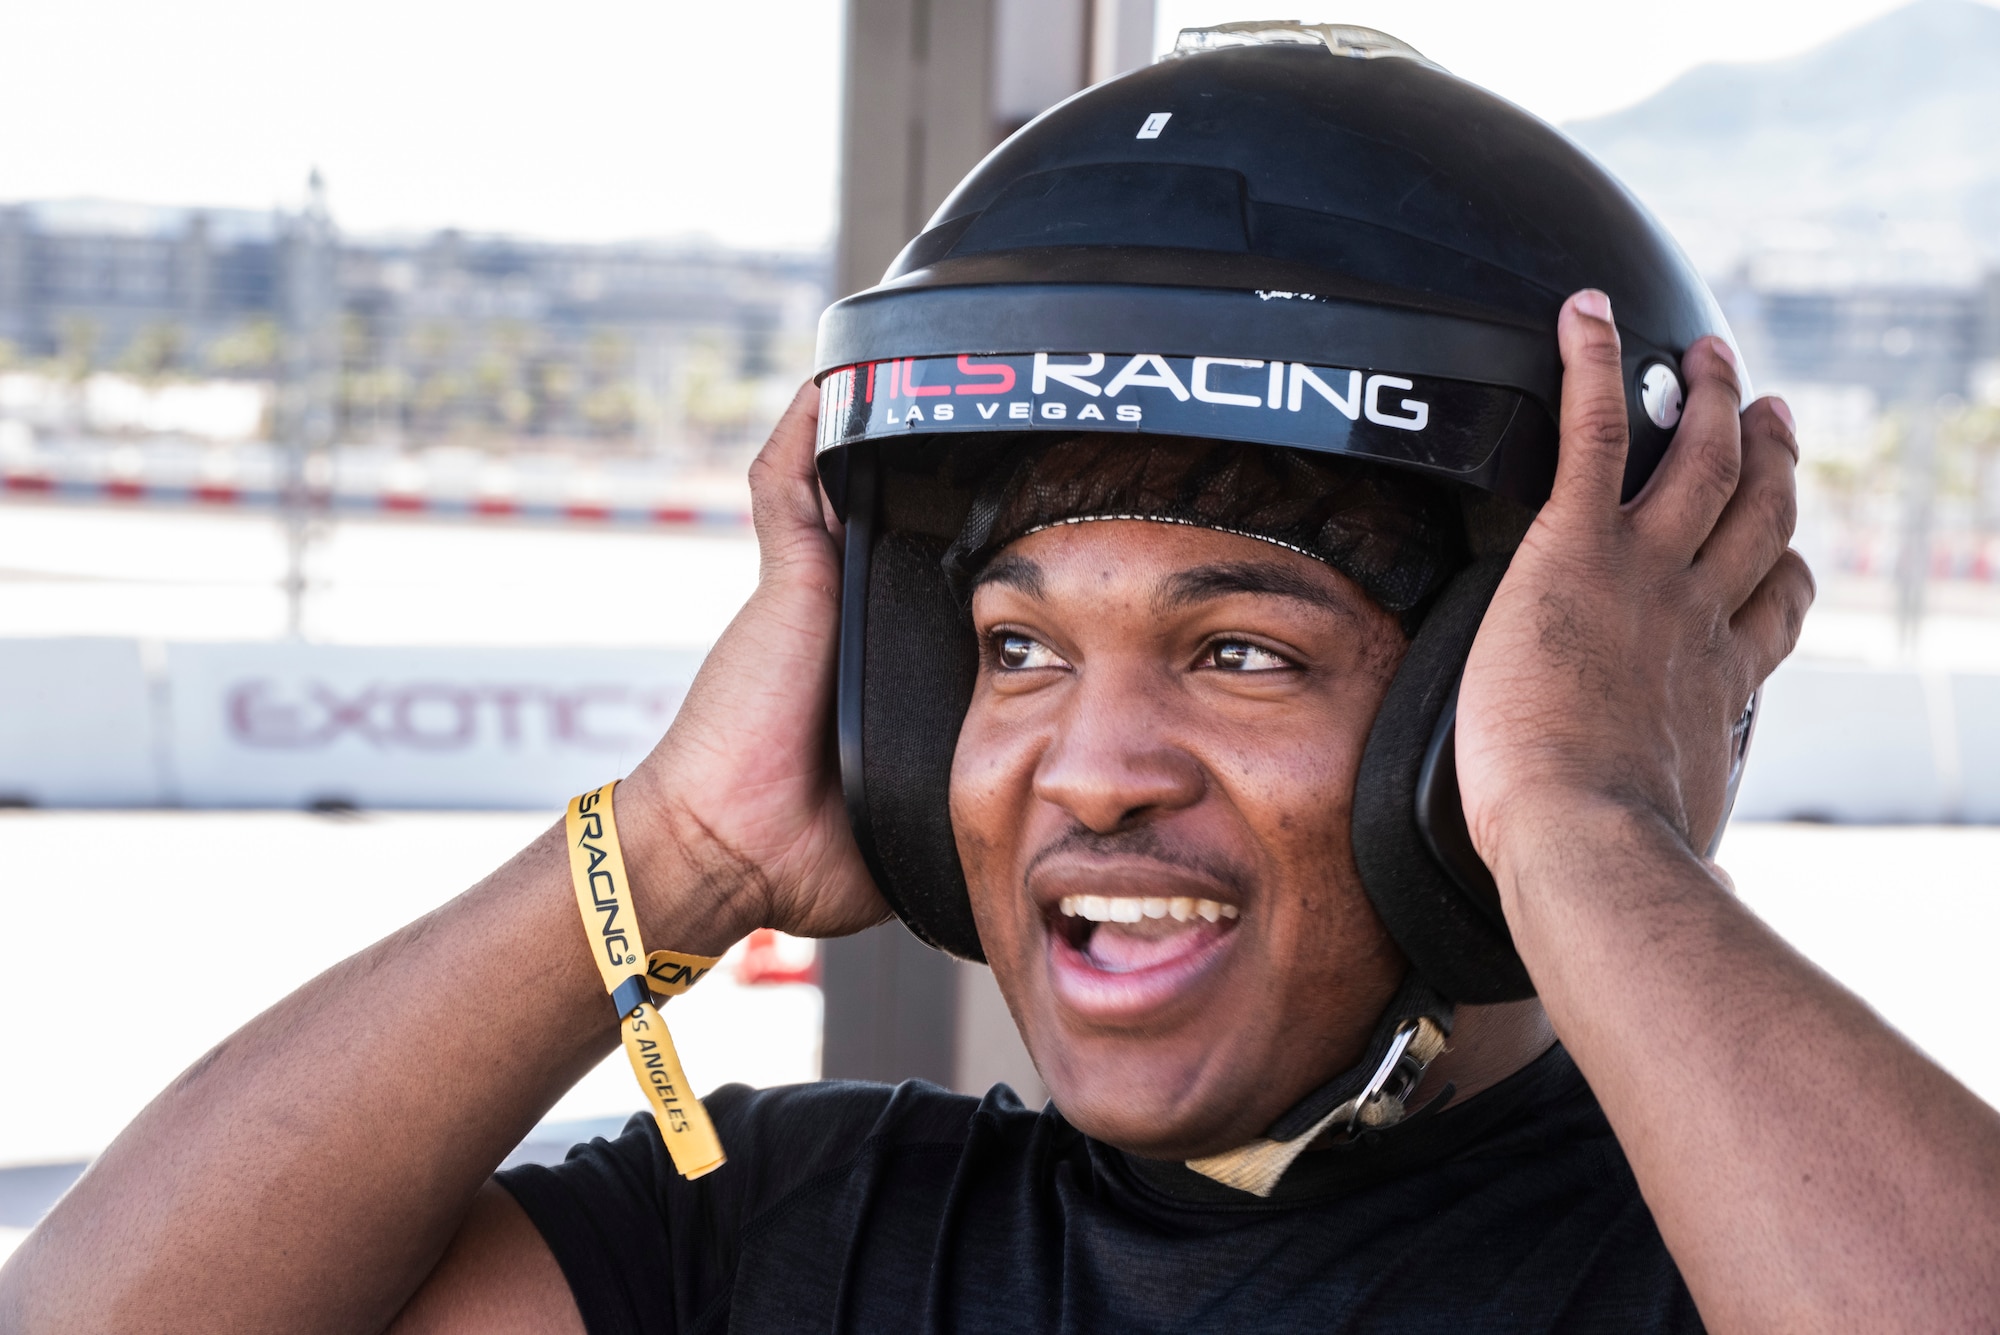 An Airman tries on a helmet at a race track in Las Vegas